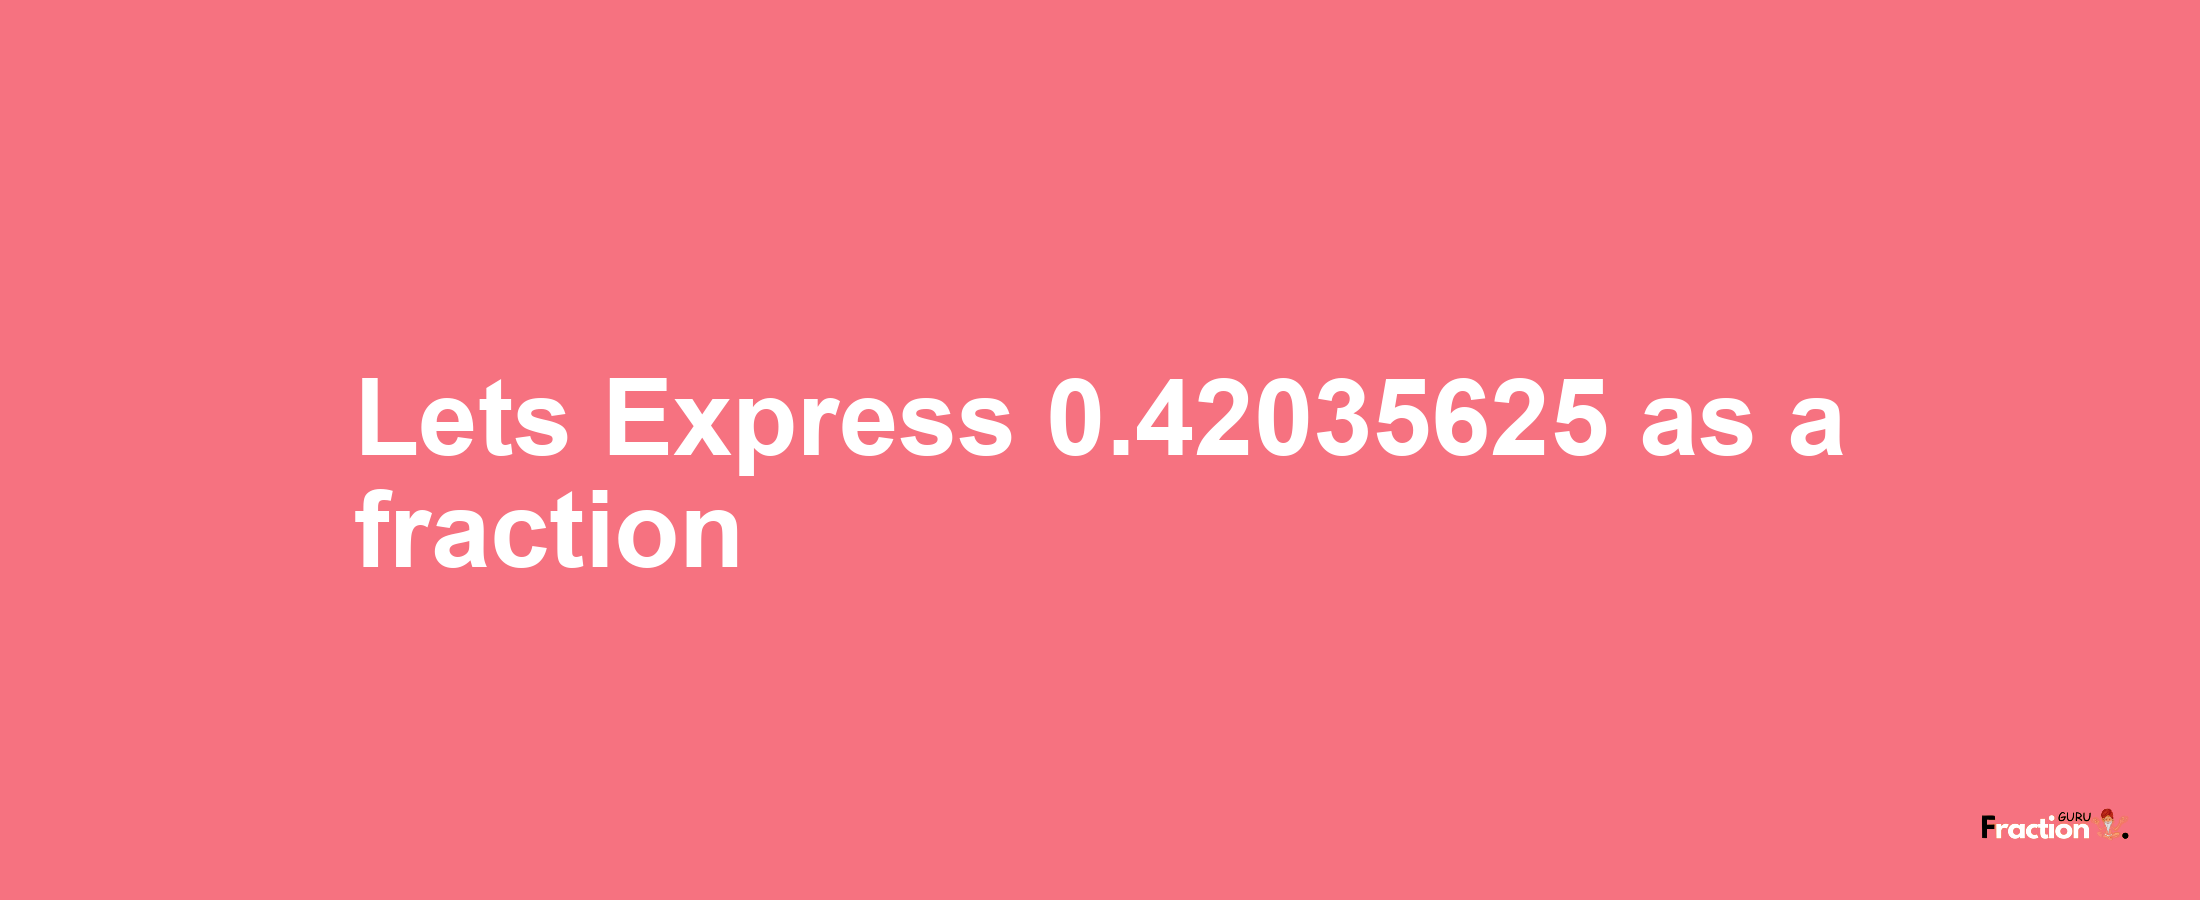 Lets Express 0.42035625 as afraction